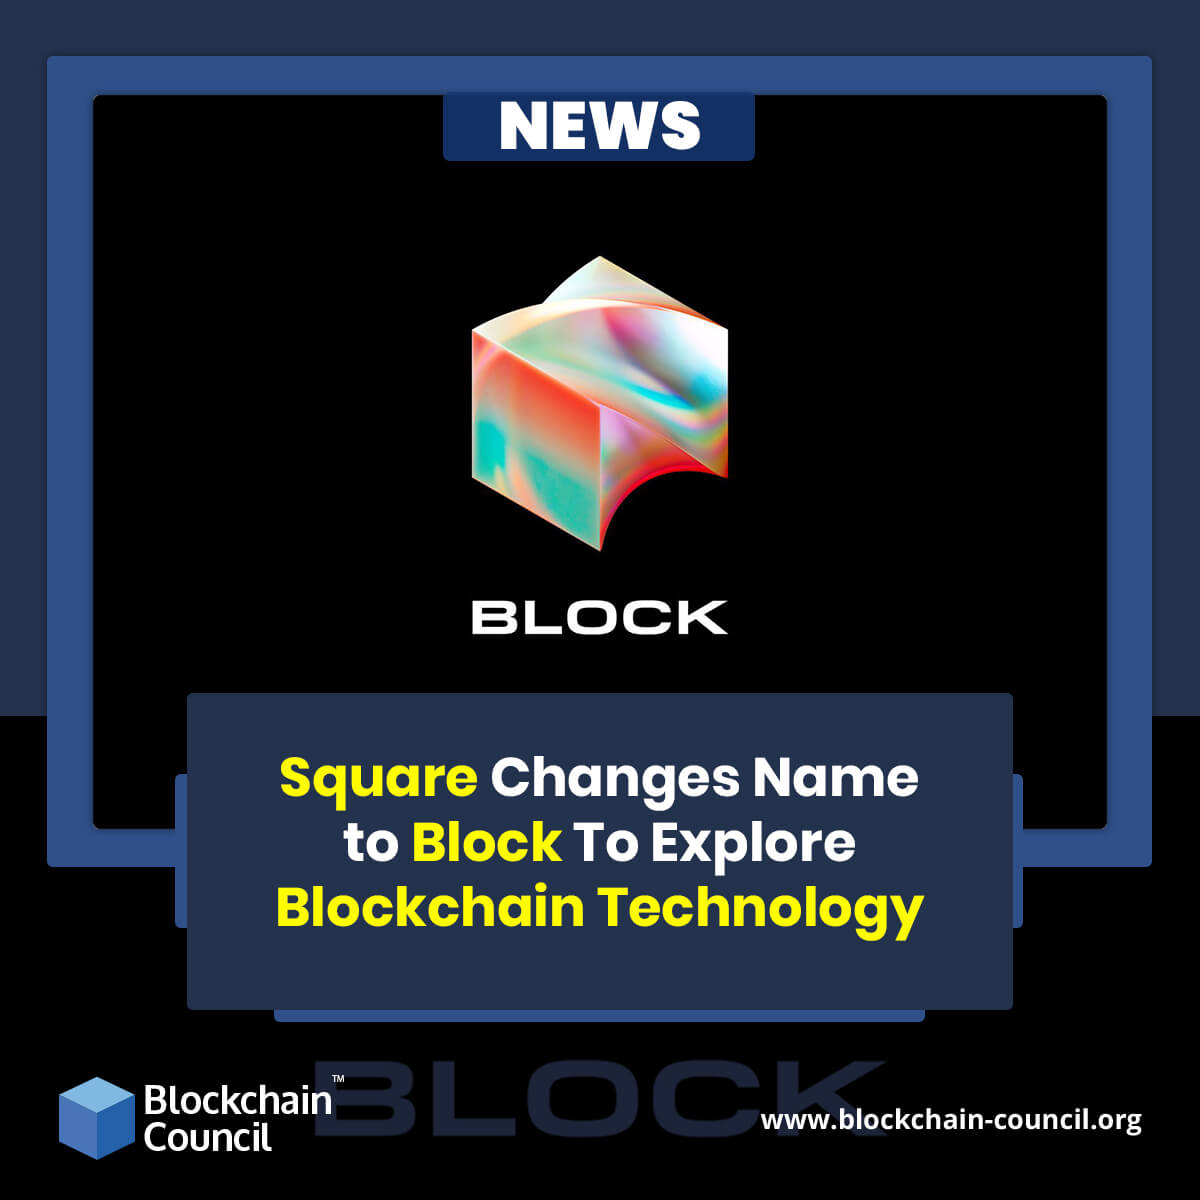 Square Changes Name to Block To Explore Blockchain Technology